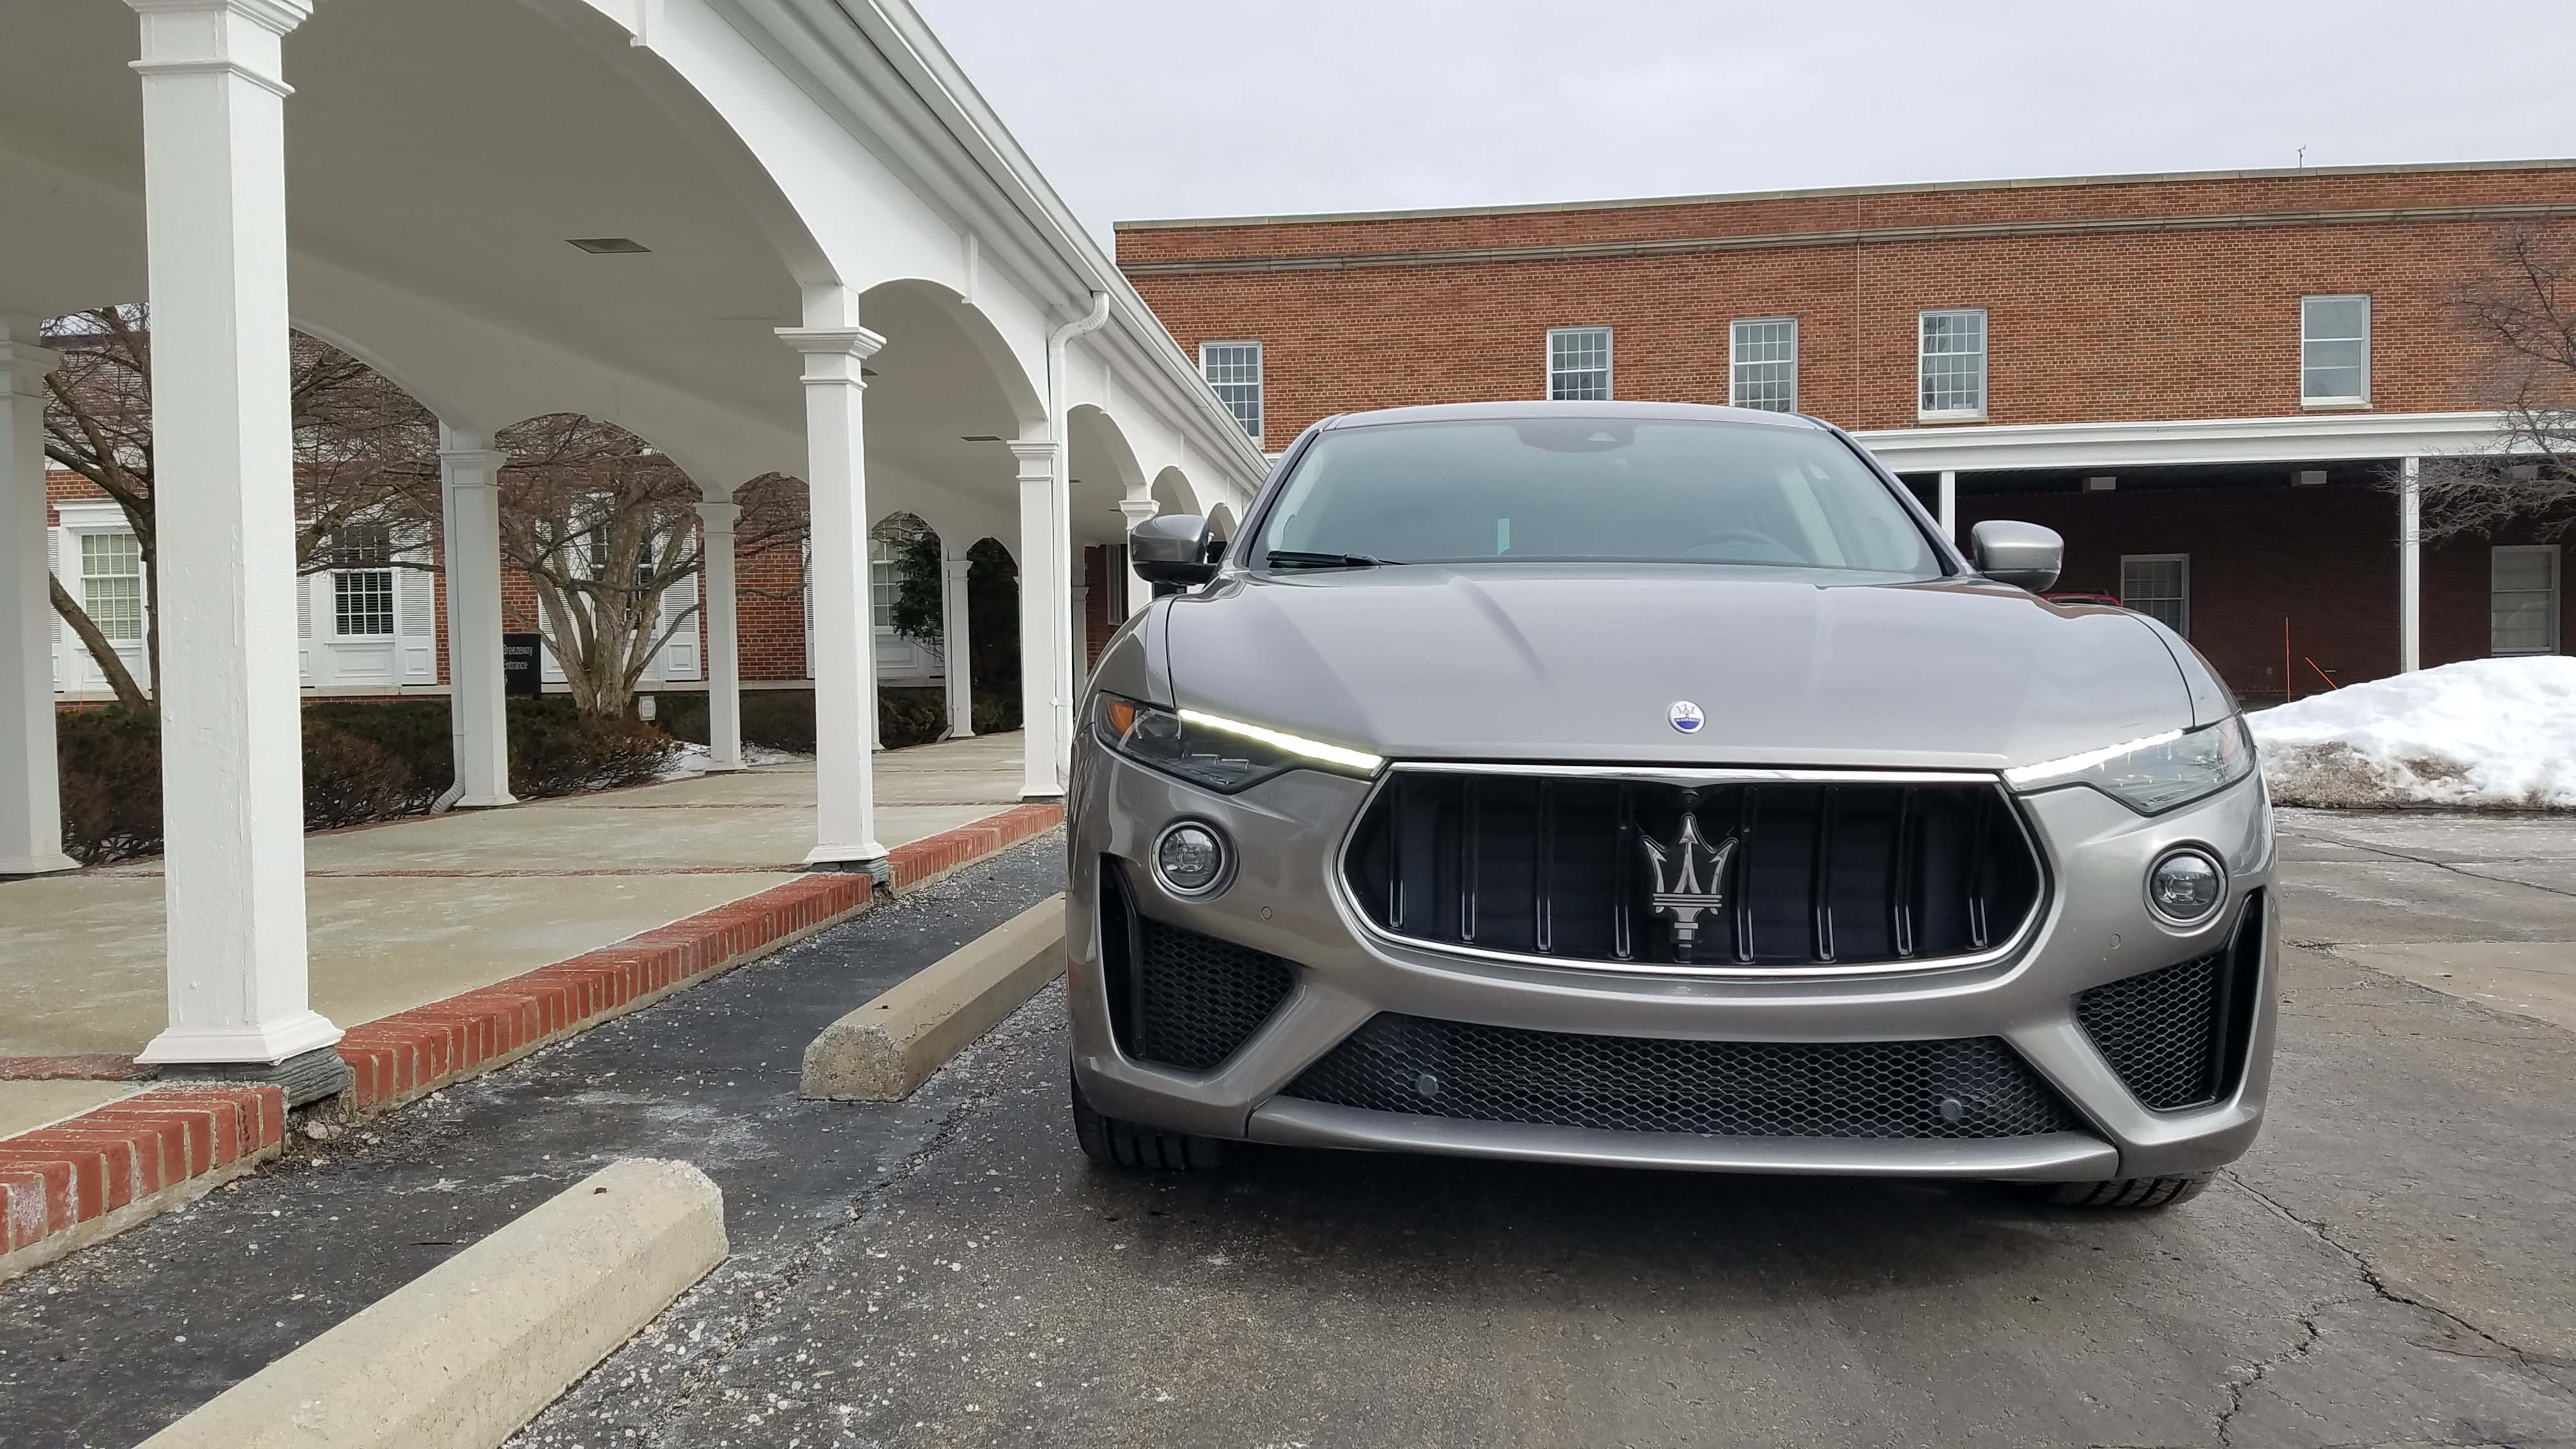 Trident. Side gills. Big grille. Yes, the Maserati Levante GTS ute is unmistakably a Maserati in the rear-view mirror.